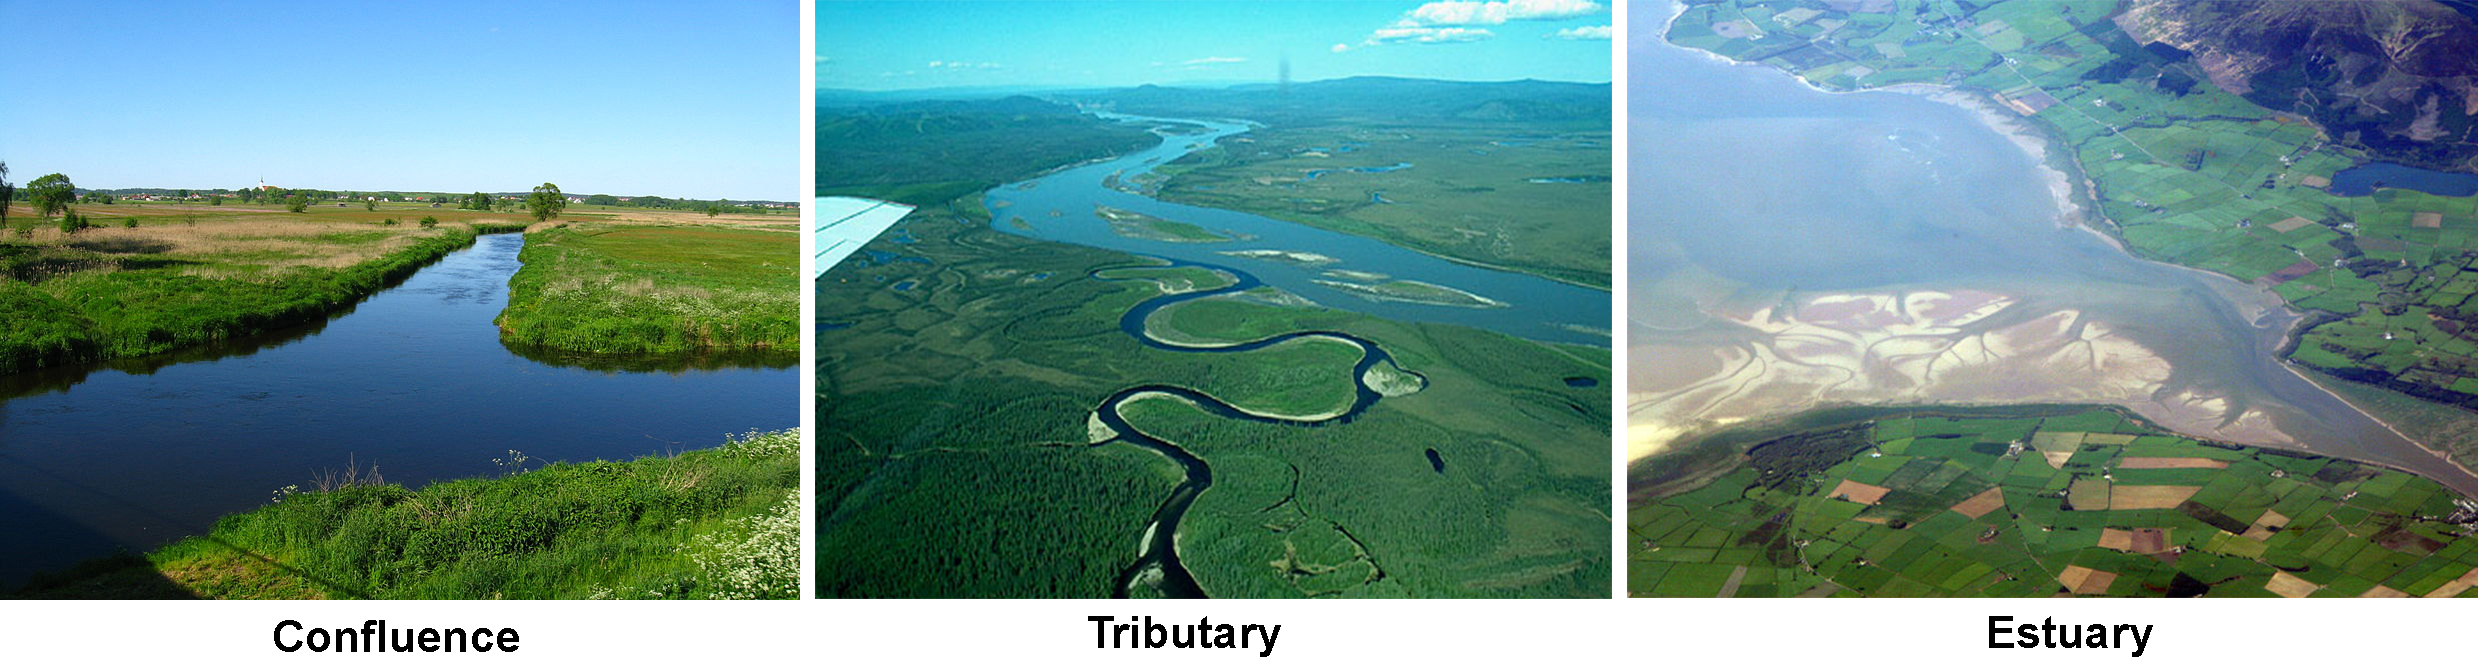 A three part image: a confluence, a tributary, and an estuary.